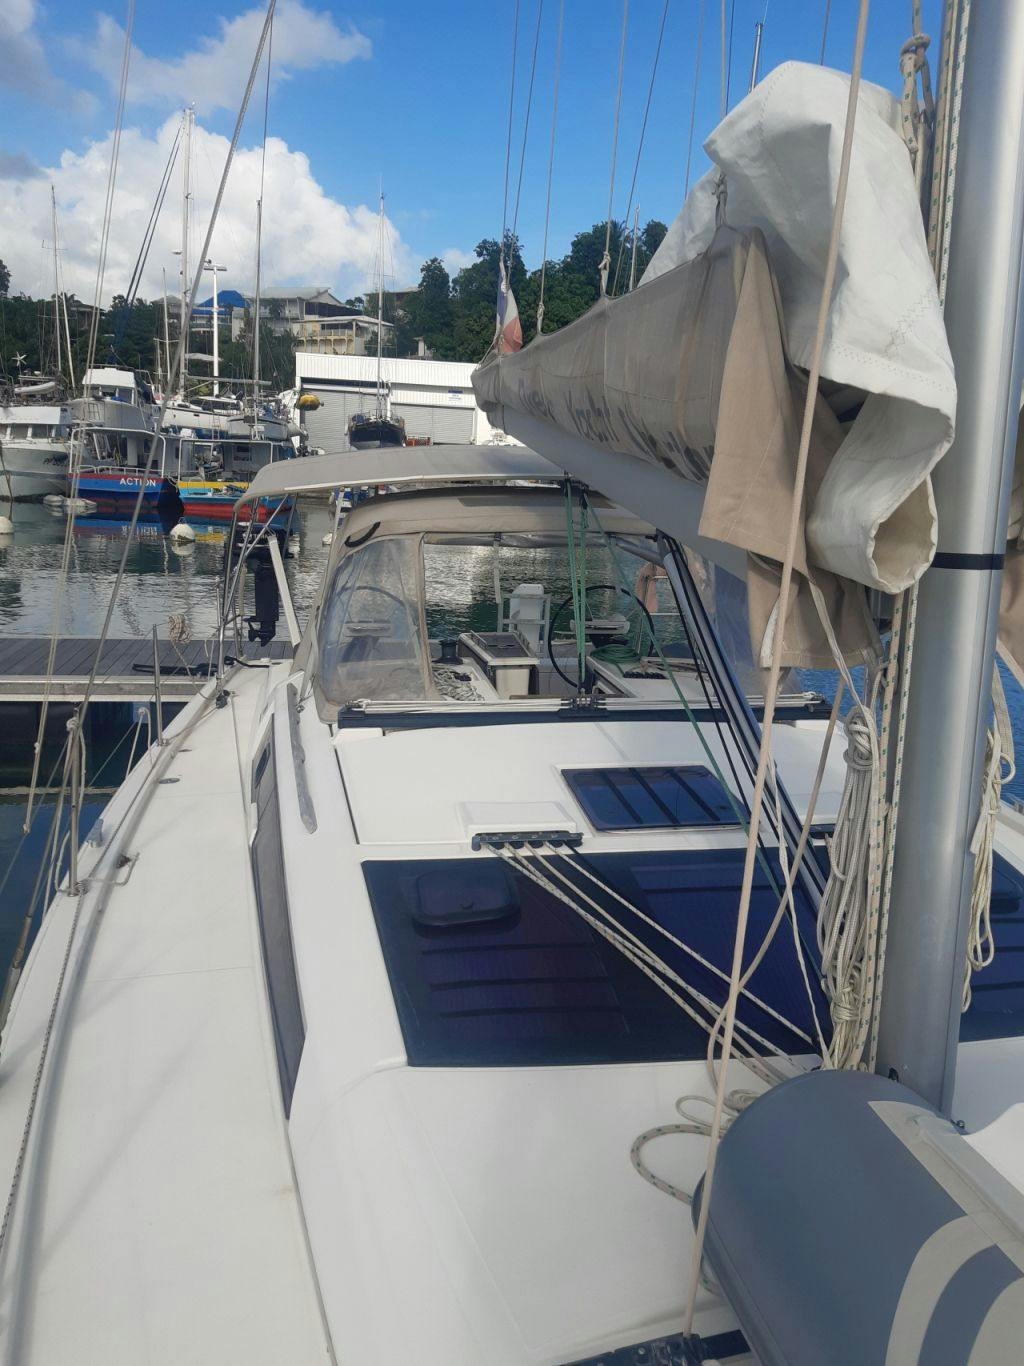 Book Dufour 390 GL Sailing yacht for bareboat charter in St. Martin, Marina de L'Anse Marcel, St. Martin, Caribbean with TripYacht!, picture 4